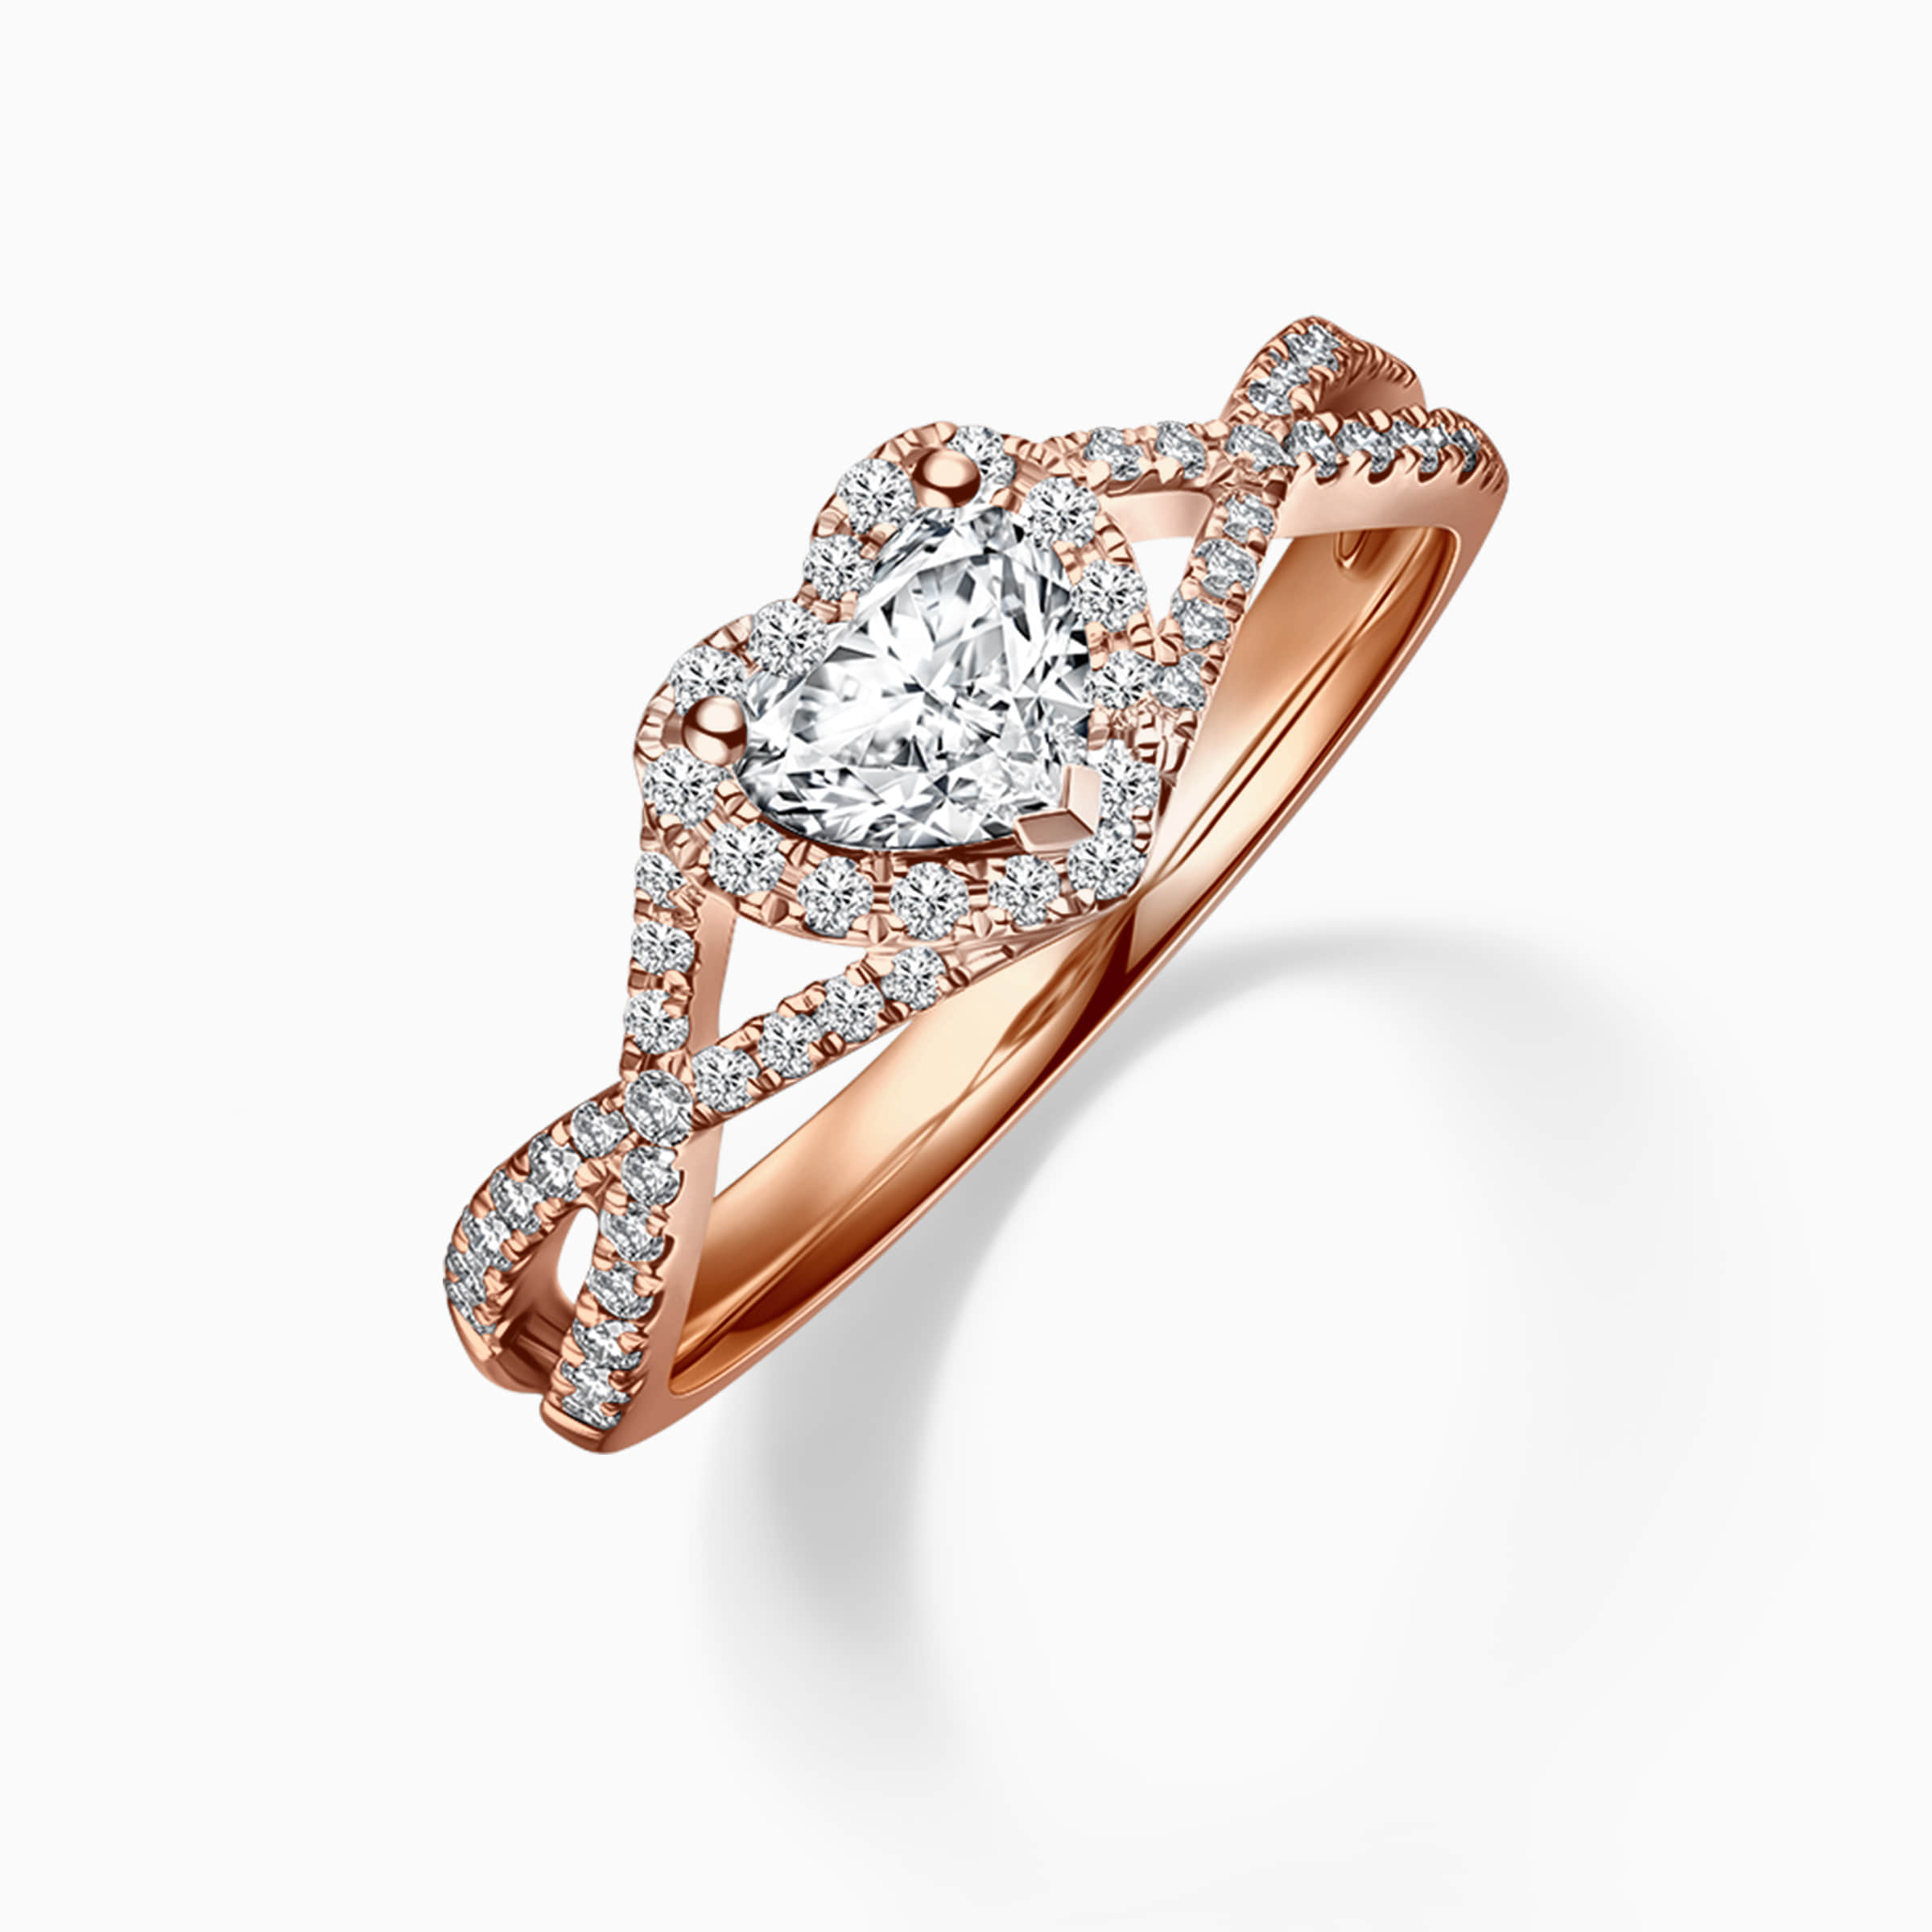 Darry Ring halo heart promise ring in rose gold